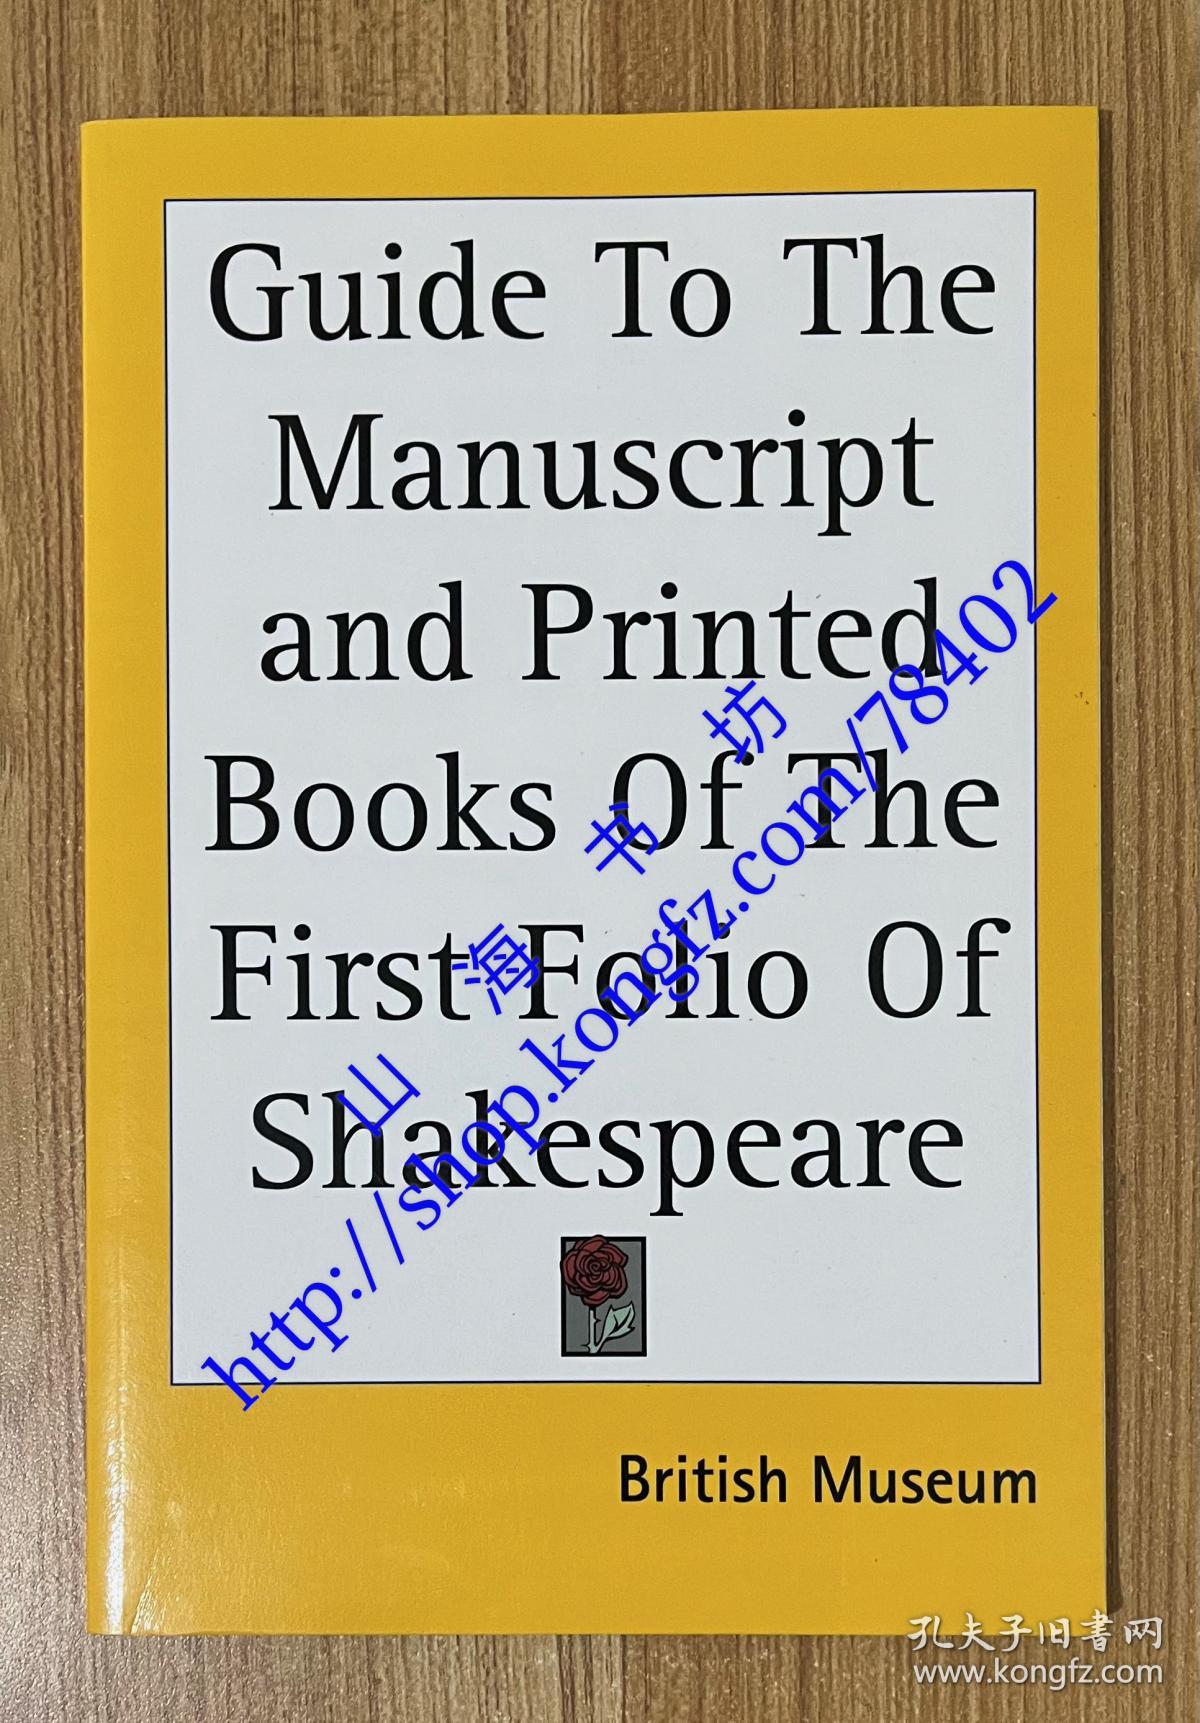 Guide To The Manuscript and Printed Books Of The First Folio Of Shakespeare